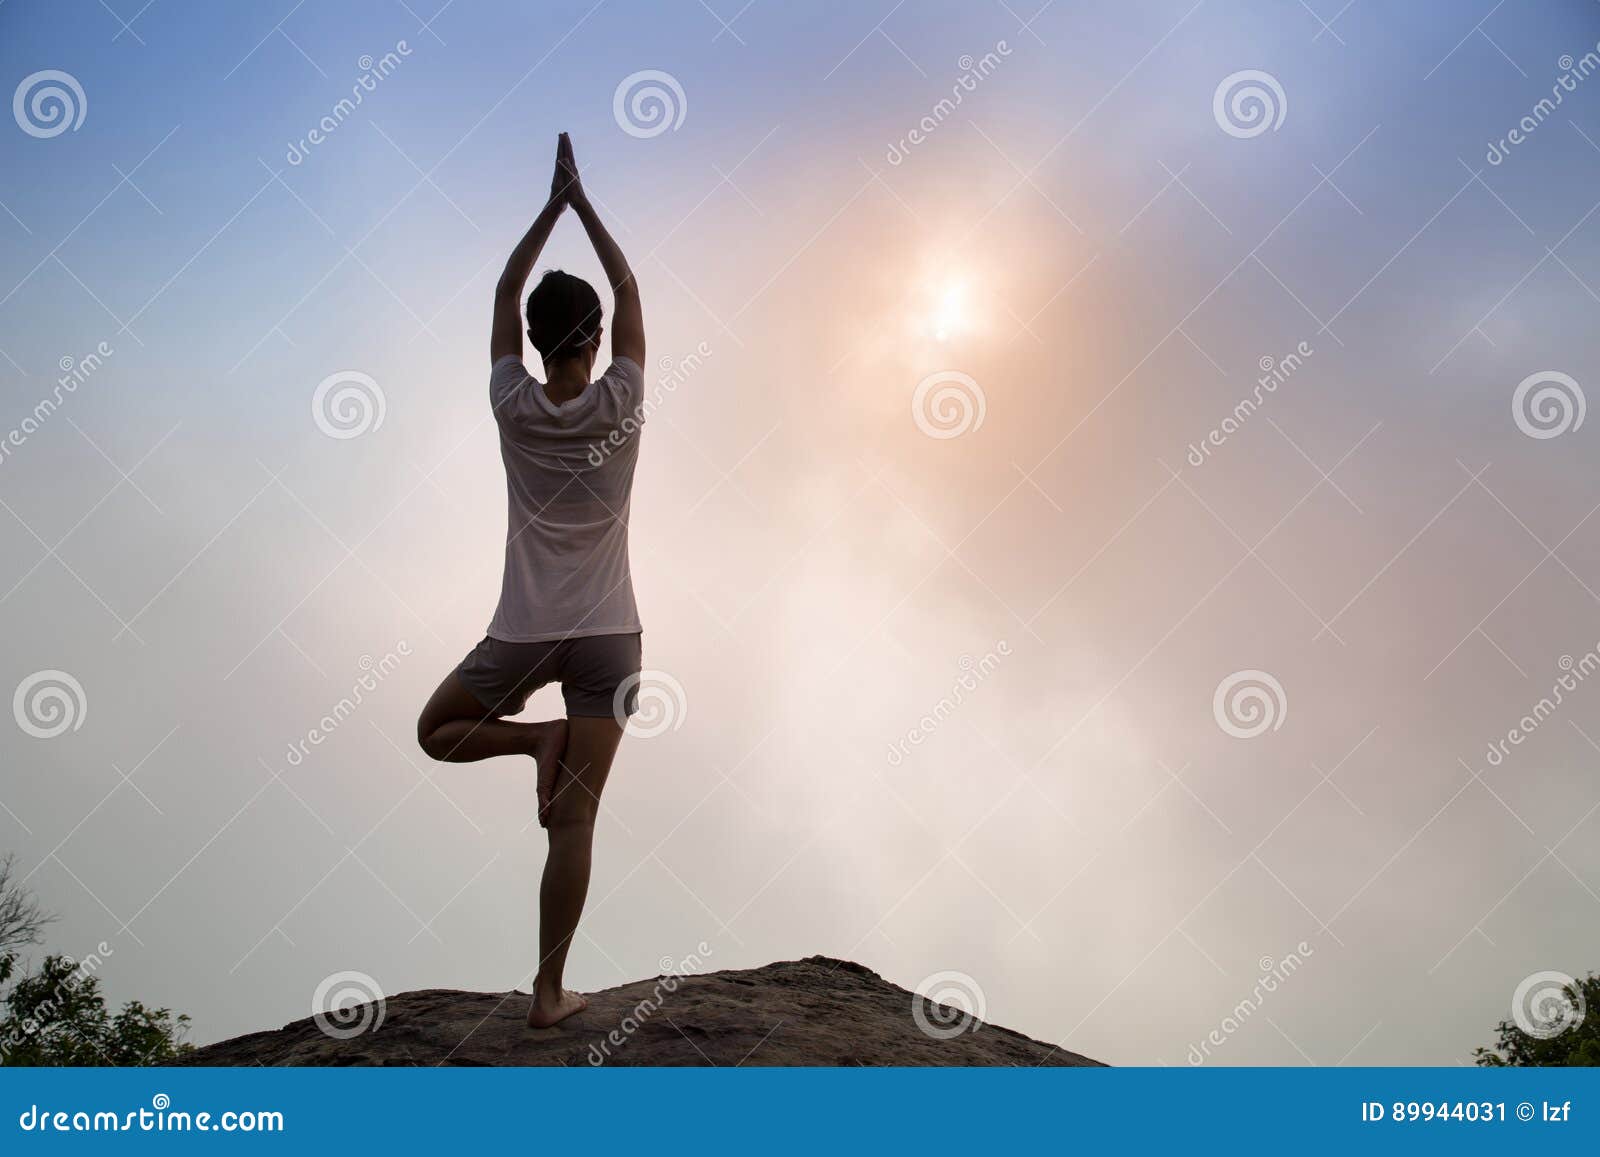 Yoga Meditation Concept, Woman Silhouette Meditating In 